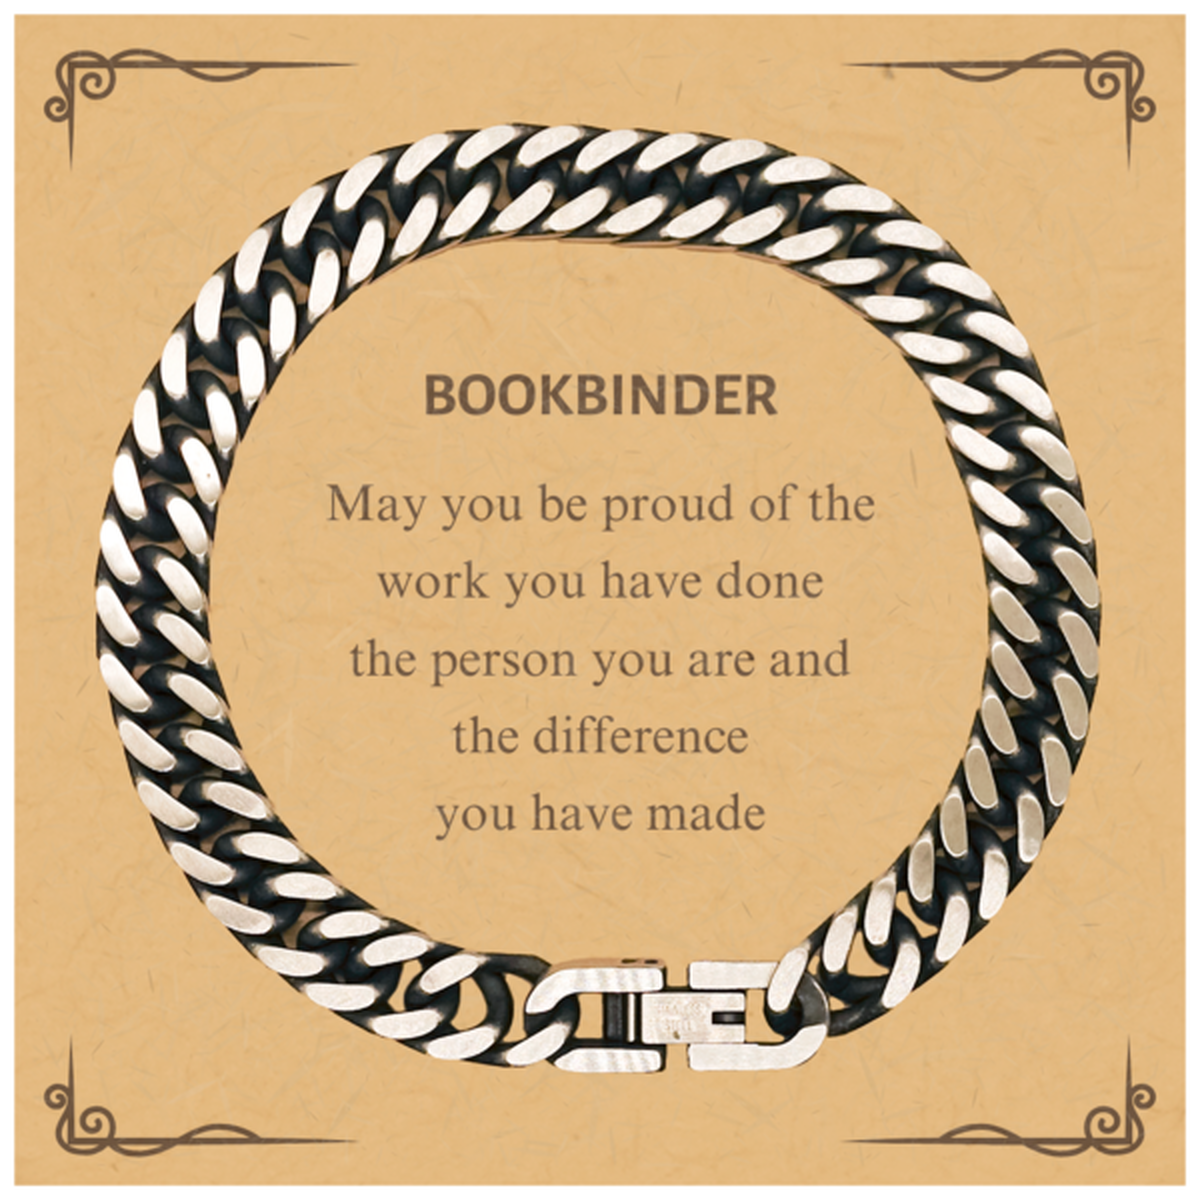 Bookbinder May you be proud of the work you have done, Retirement Bookbinder Cuban Link Chain Bracelet for Colleague Appreciation Gifts Amazing for Bookbinder